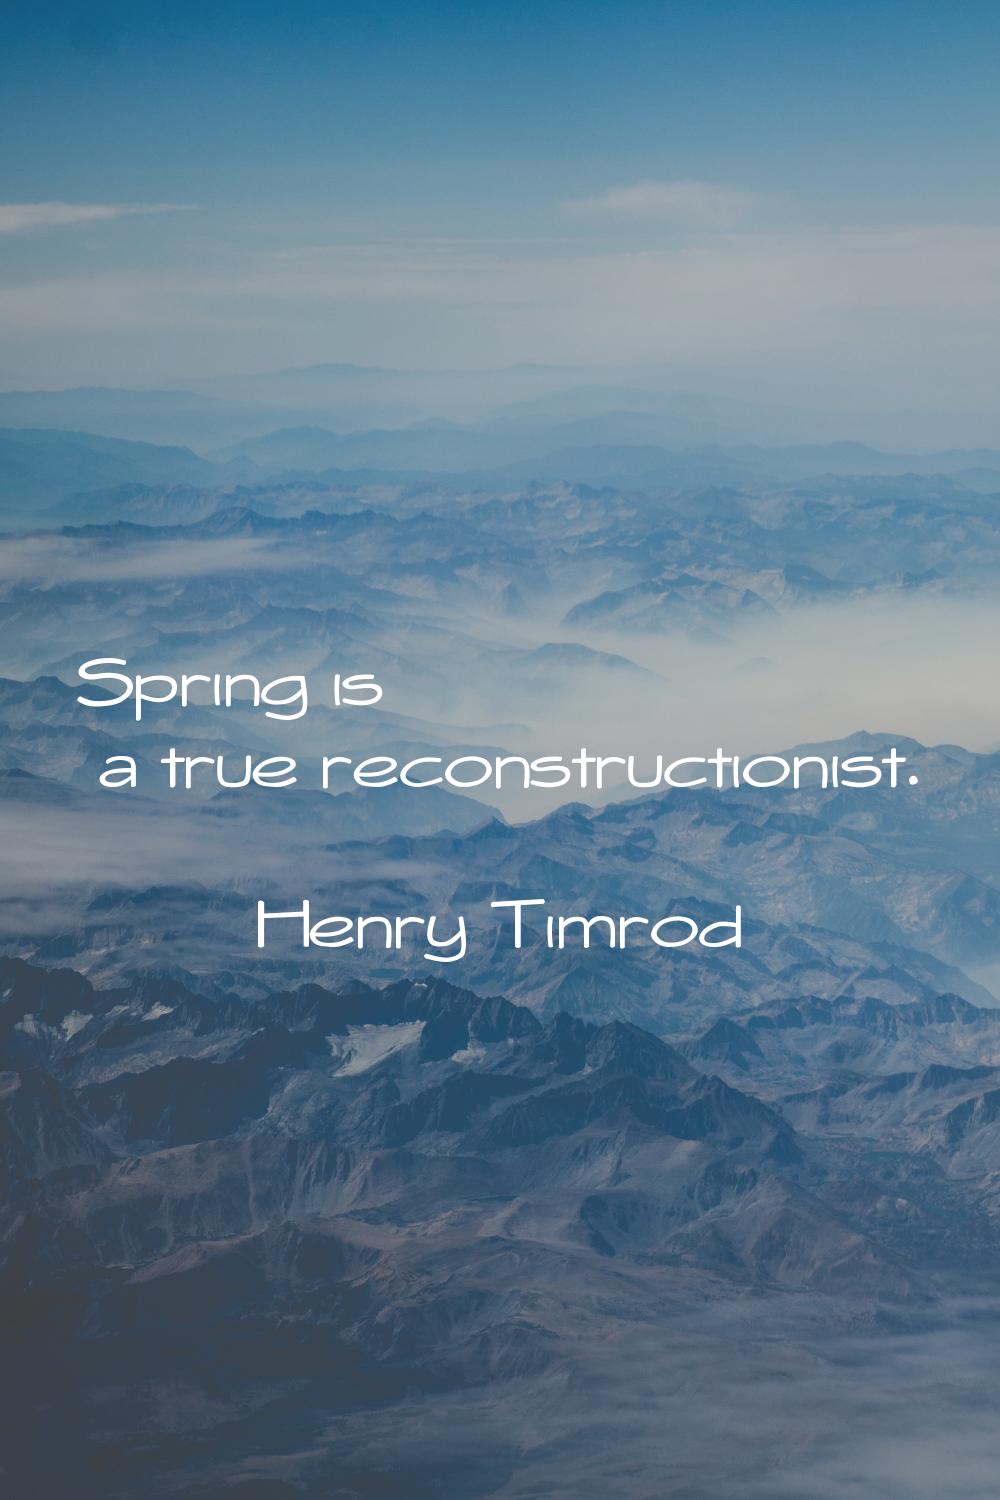 Spring is a true reconstructionist.